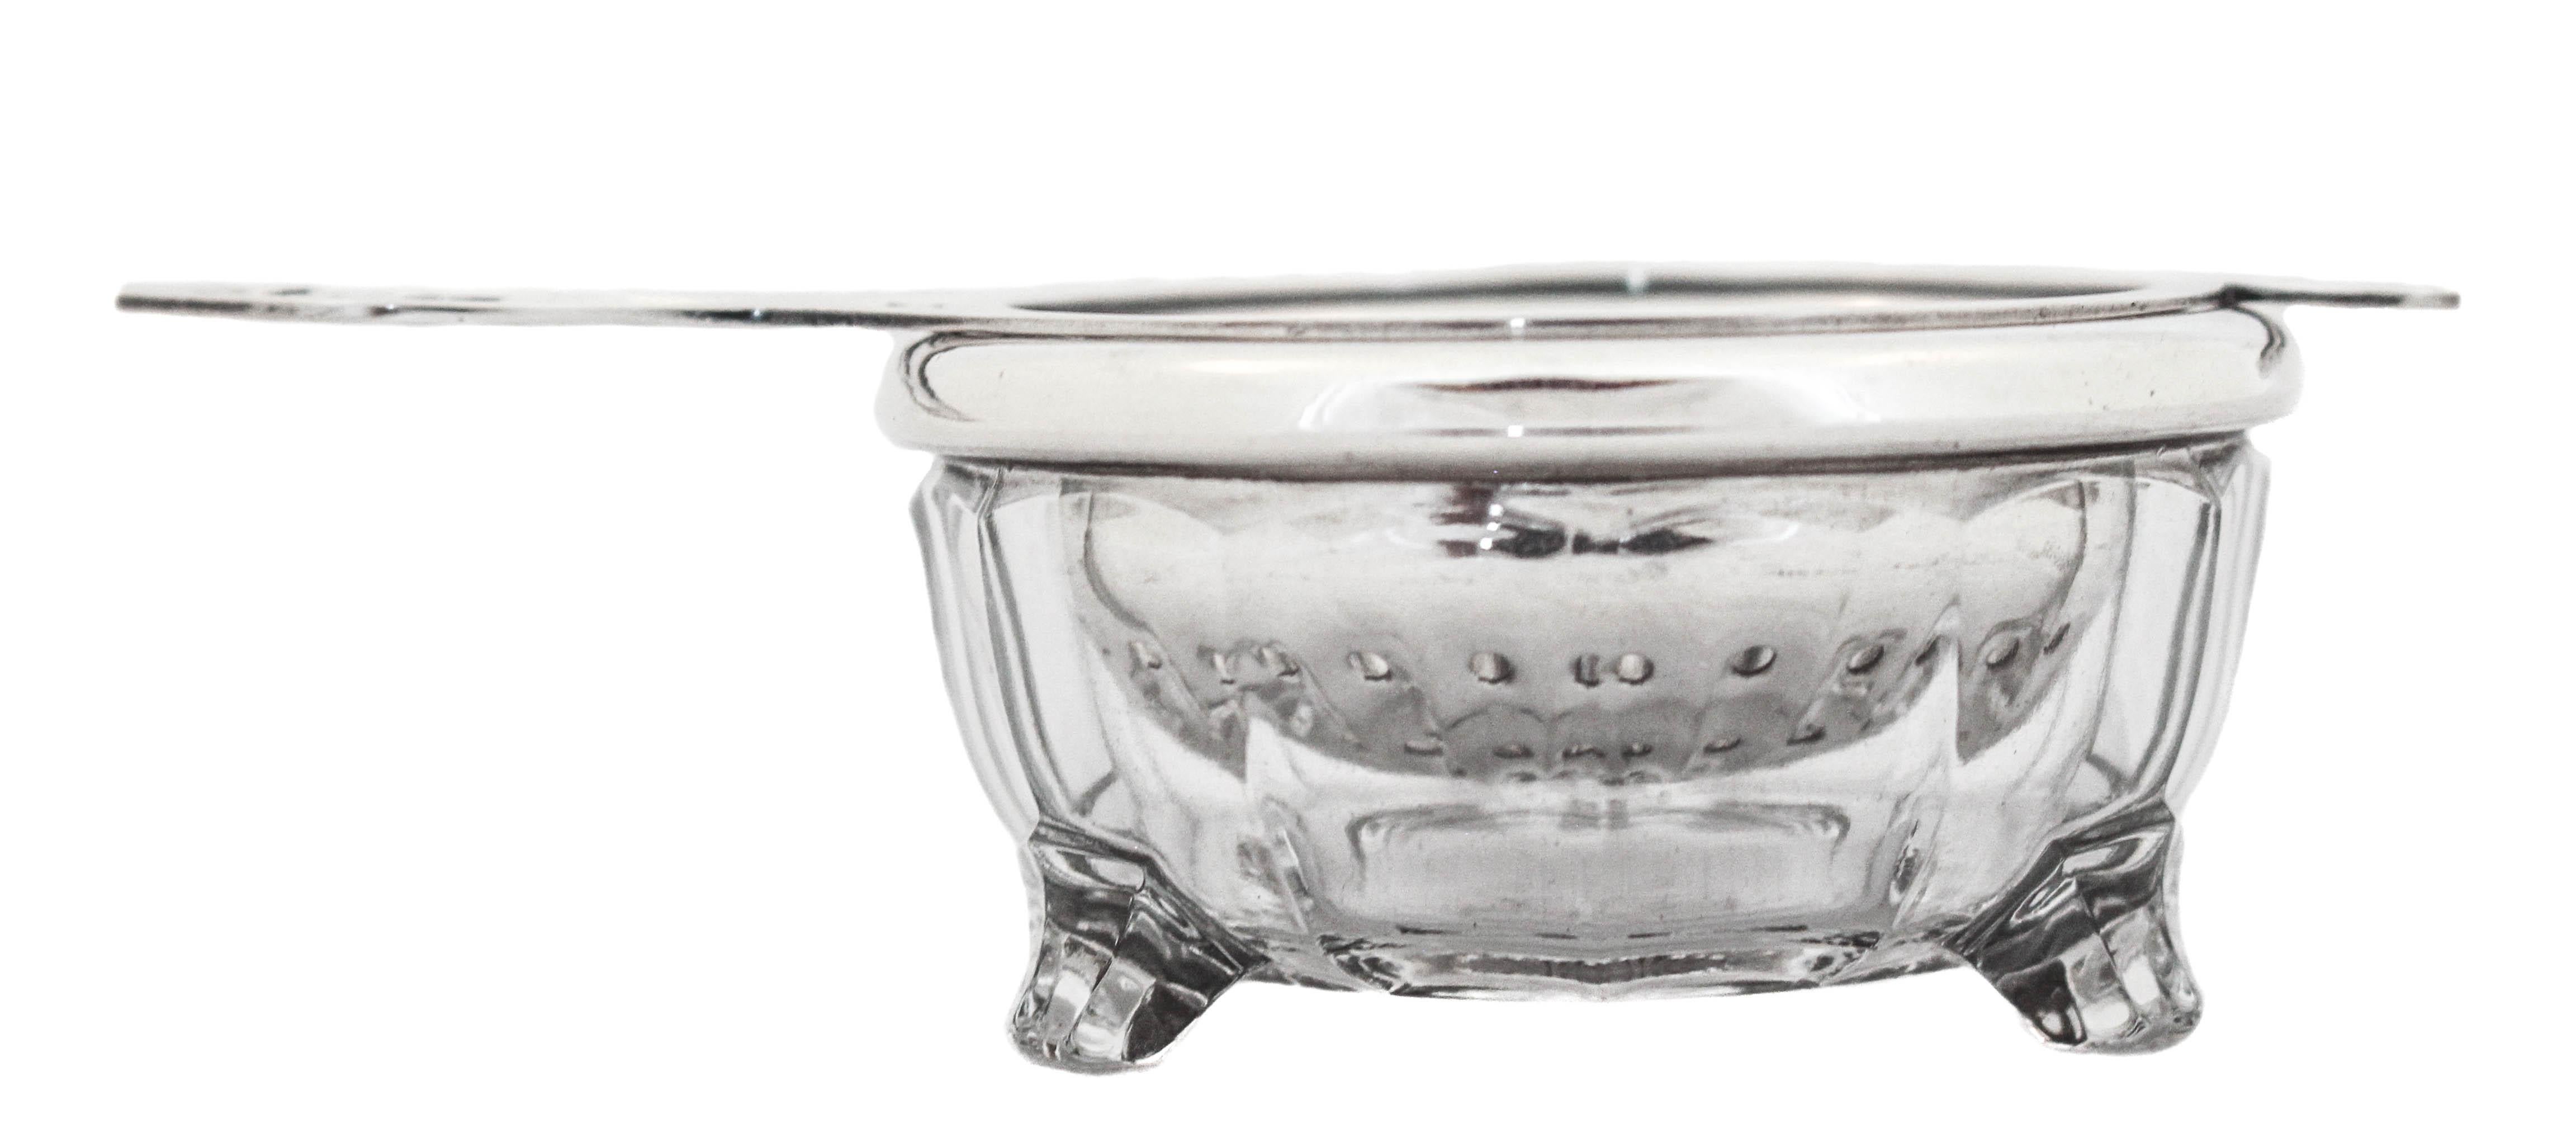 Attention fellow tea lovers this darling tea strainer is sterling silver! The crystal bowl also has a sterling silver rim with three feet and a paneled design. When you’re done using the strainer, simply put it on the bowl and it collects the access